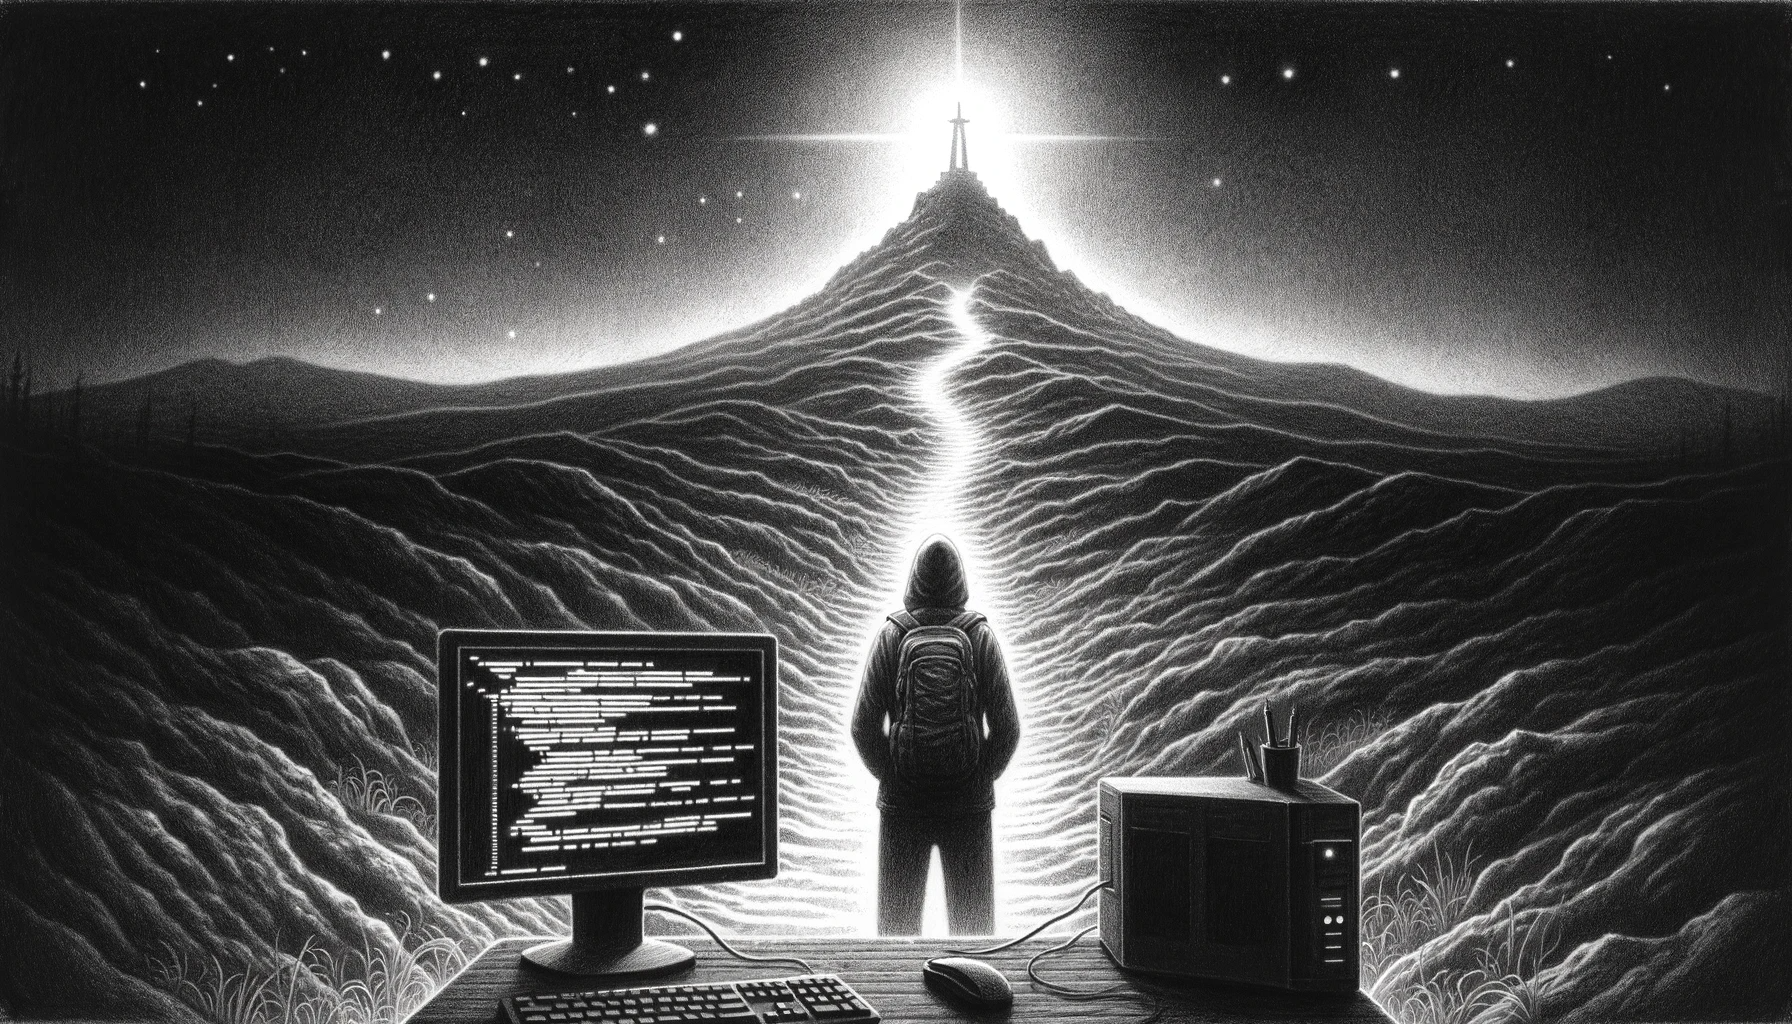 AI Product Development Journey (Header Image): An engineer and computer peering off into the distance searching for evaluation enlightenment